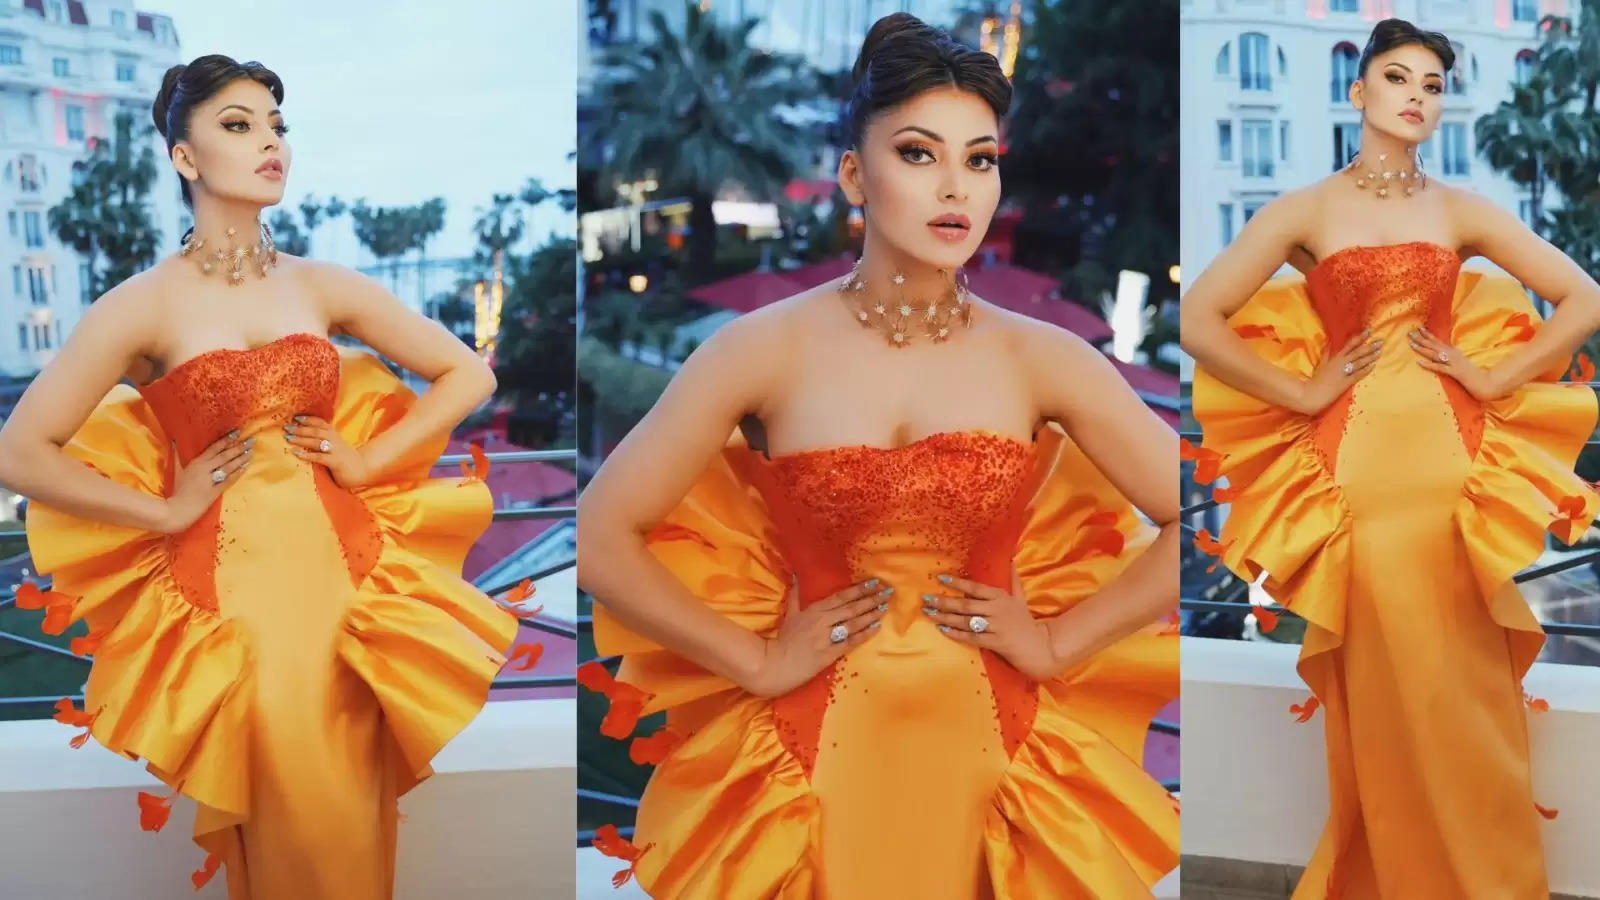 Cannes Film Festival: Urvashi Rautela is "Undisputed the new Ultimate Queen of Cannes" says fans as she rocks in Homologo's Paris Orange Gown